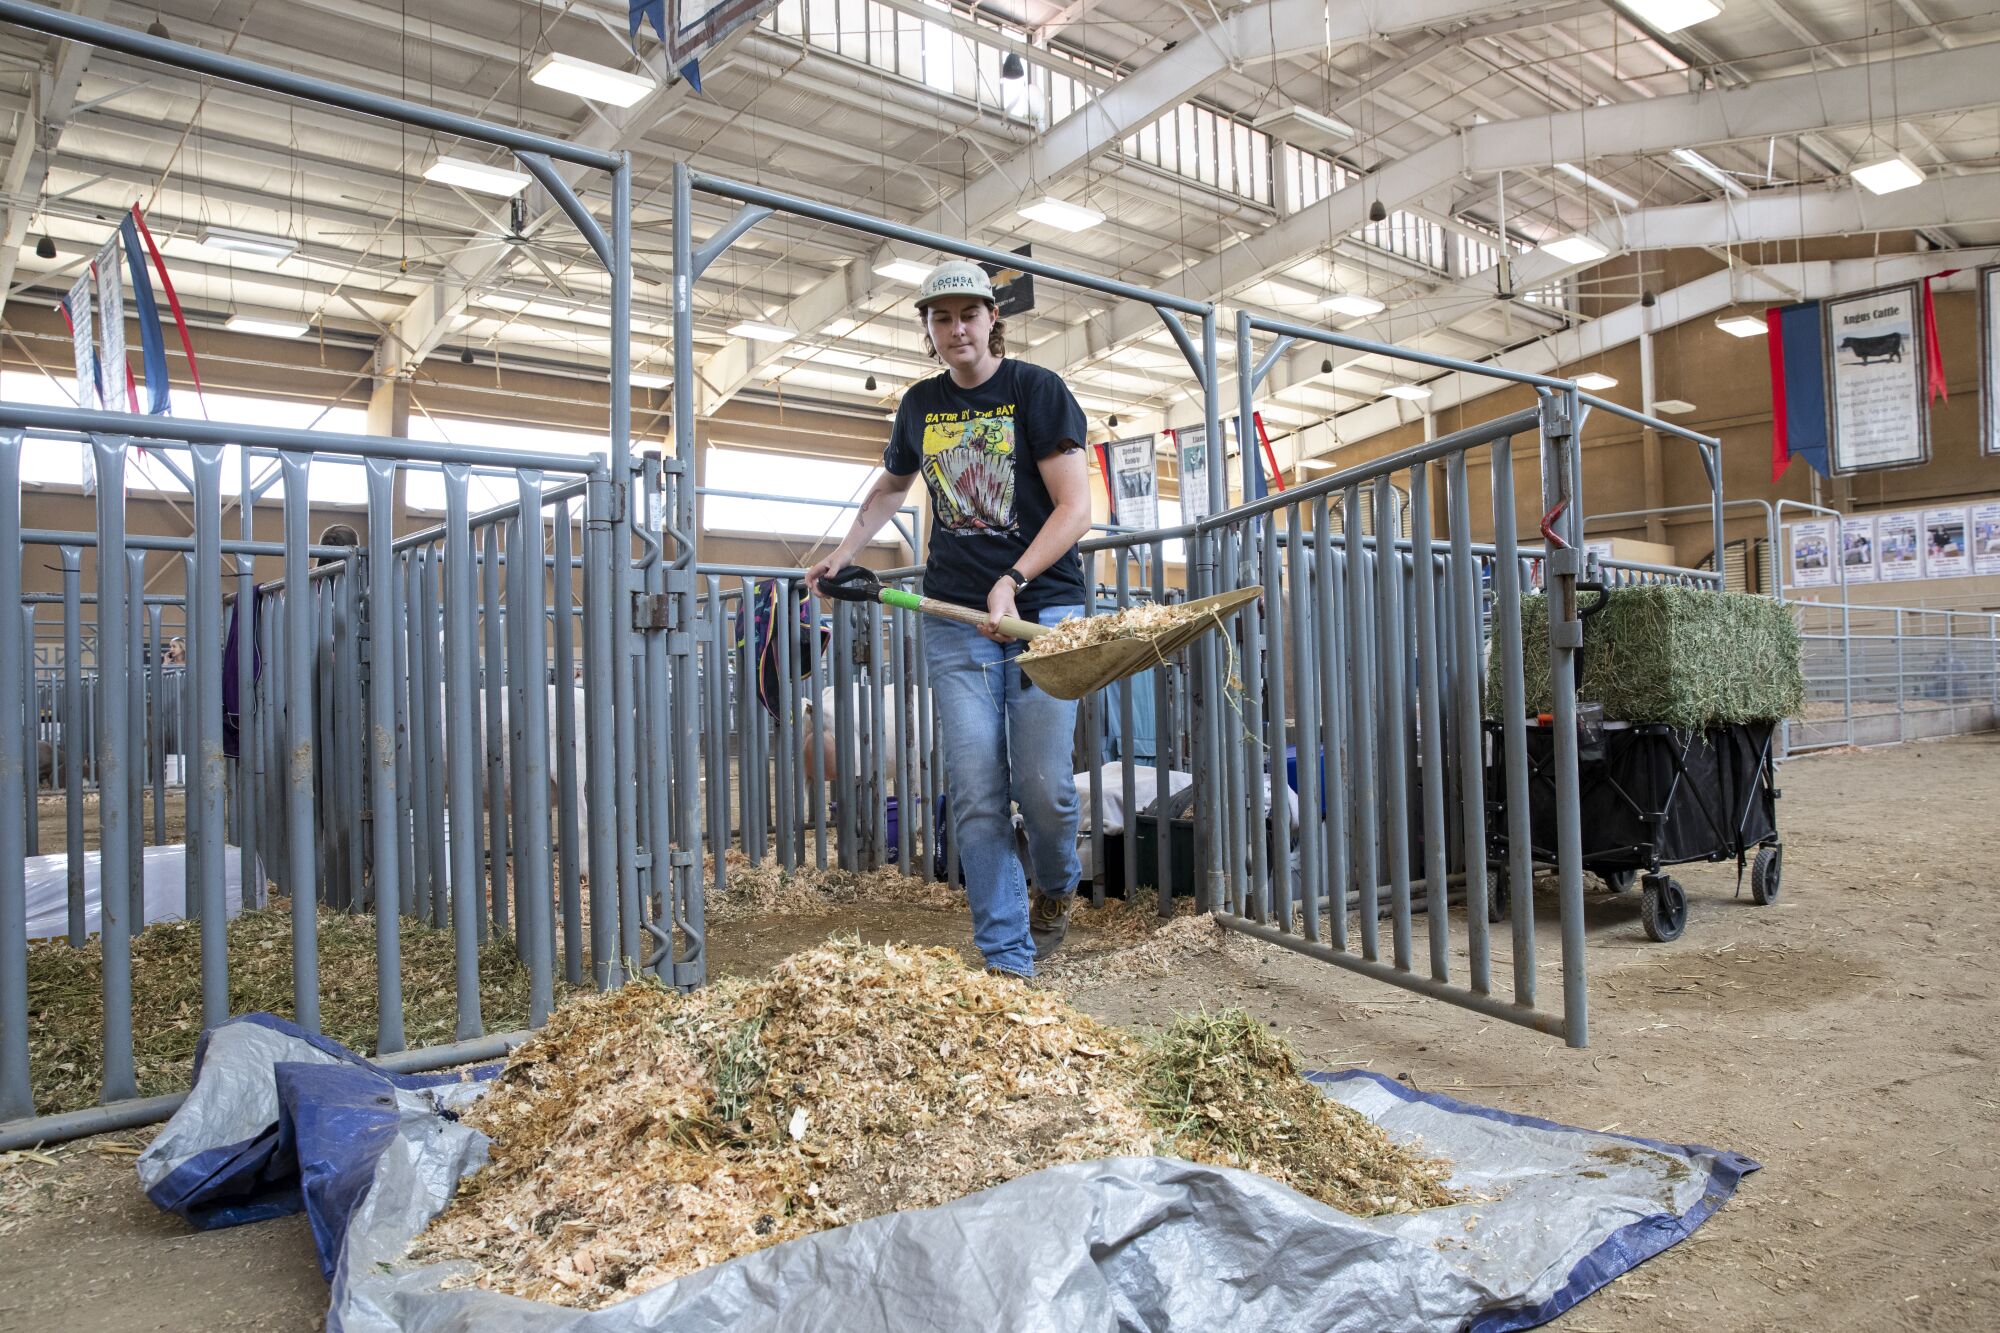 Emily Hylton, 25, of Poway, cleans goat cages at the County Fair.